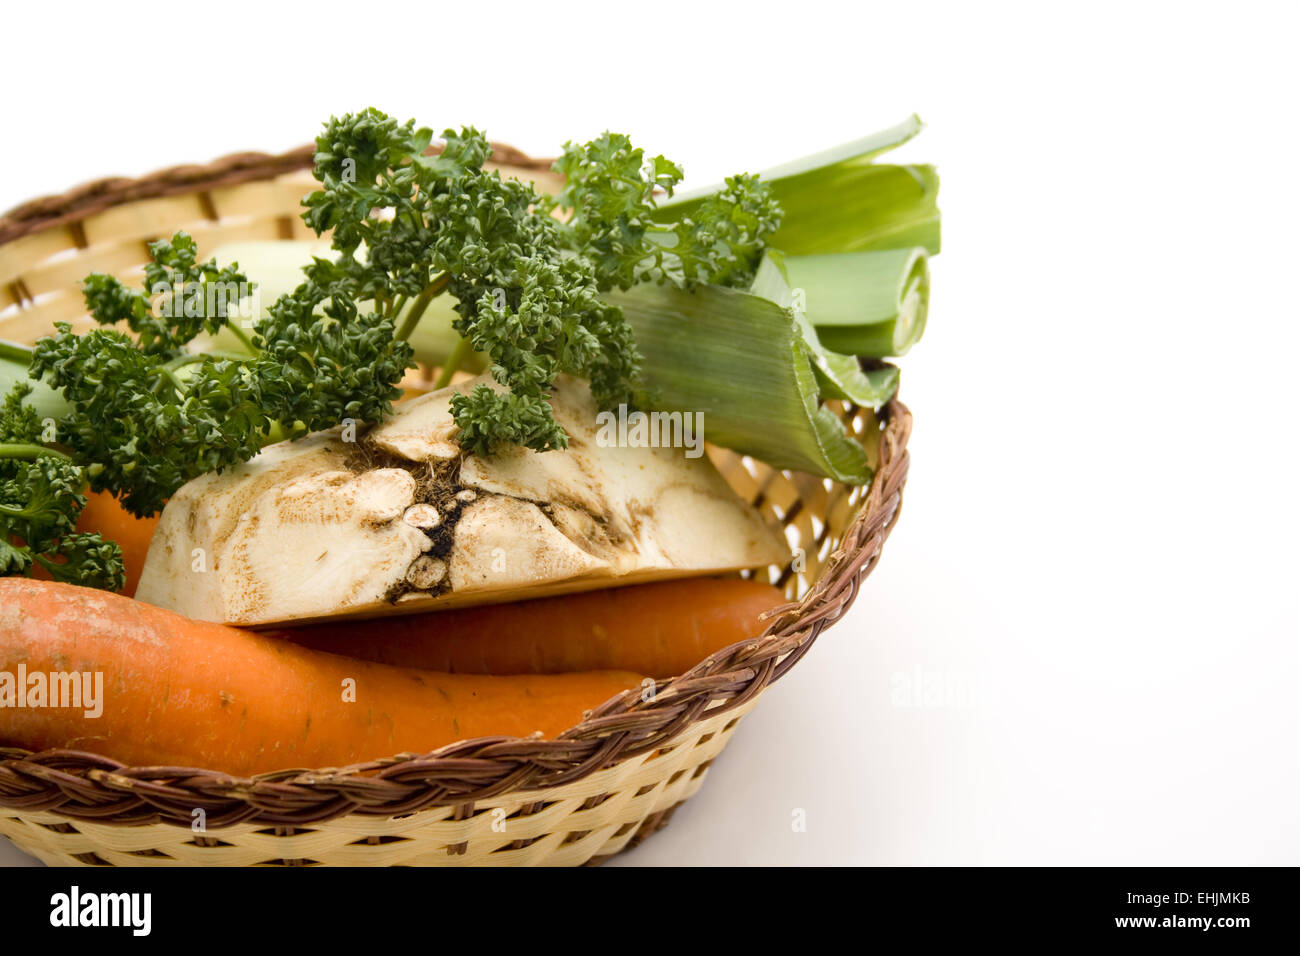 Soup vegetables in the basket Stock Photo